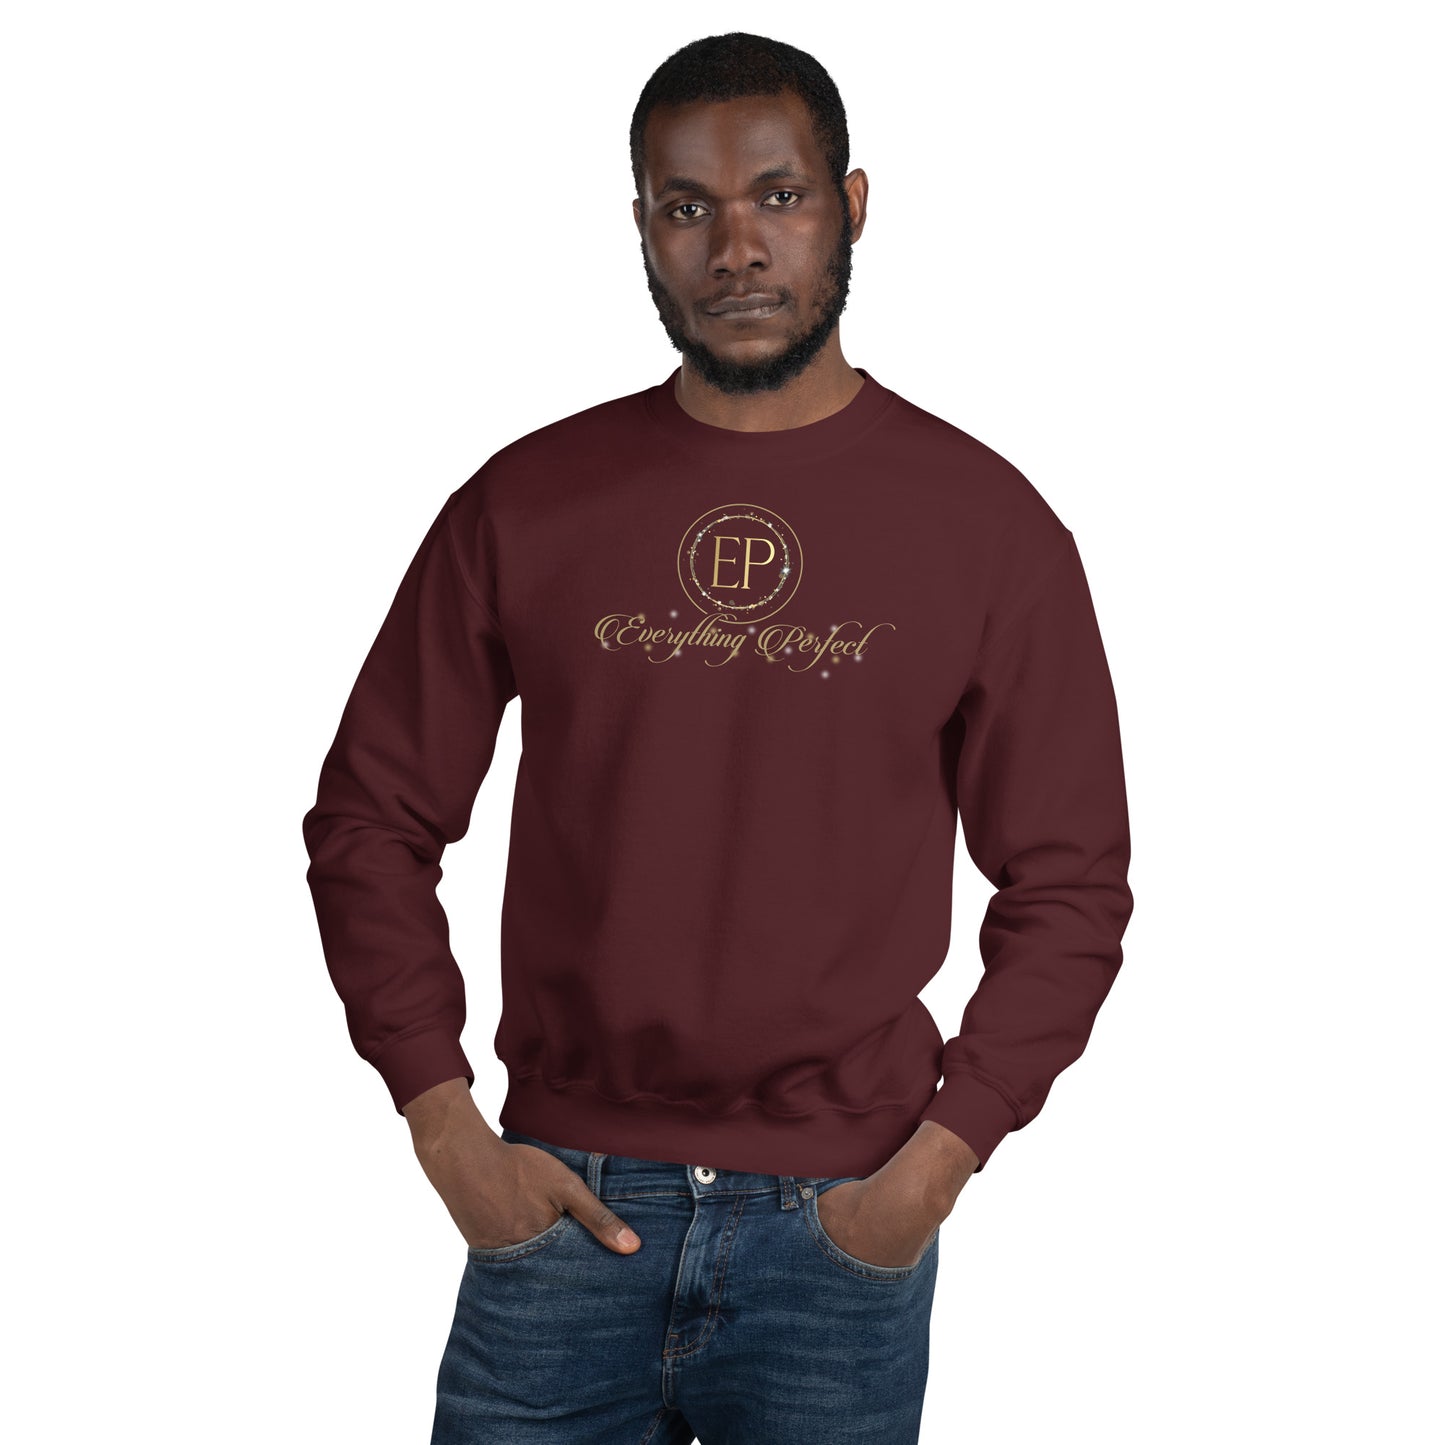 Athletic fitted EP Sweatshirt